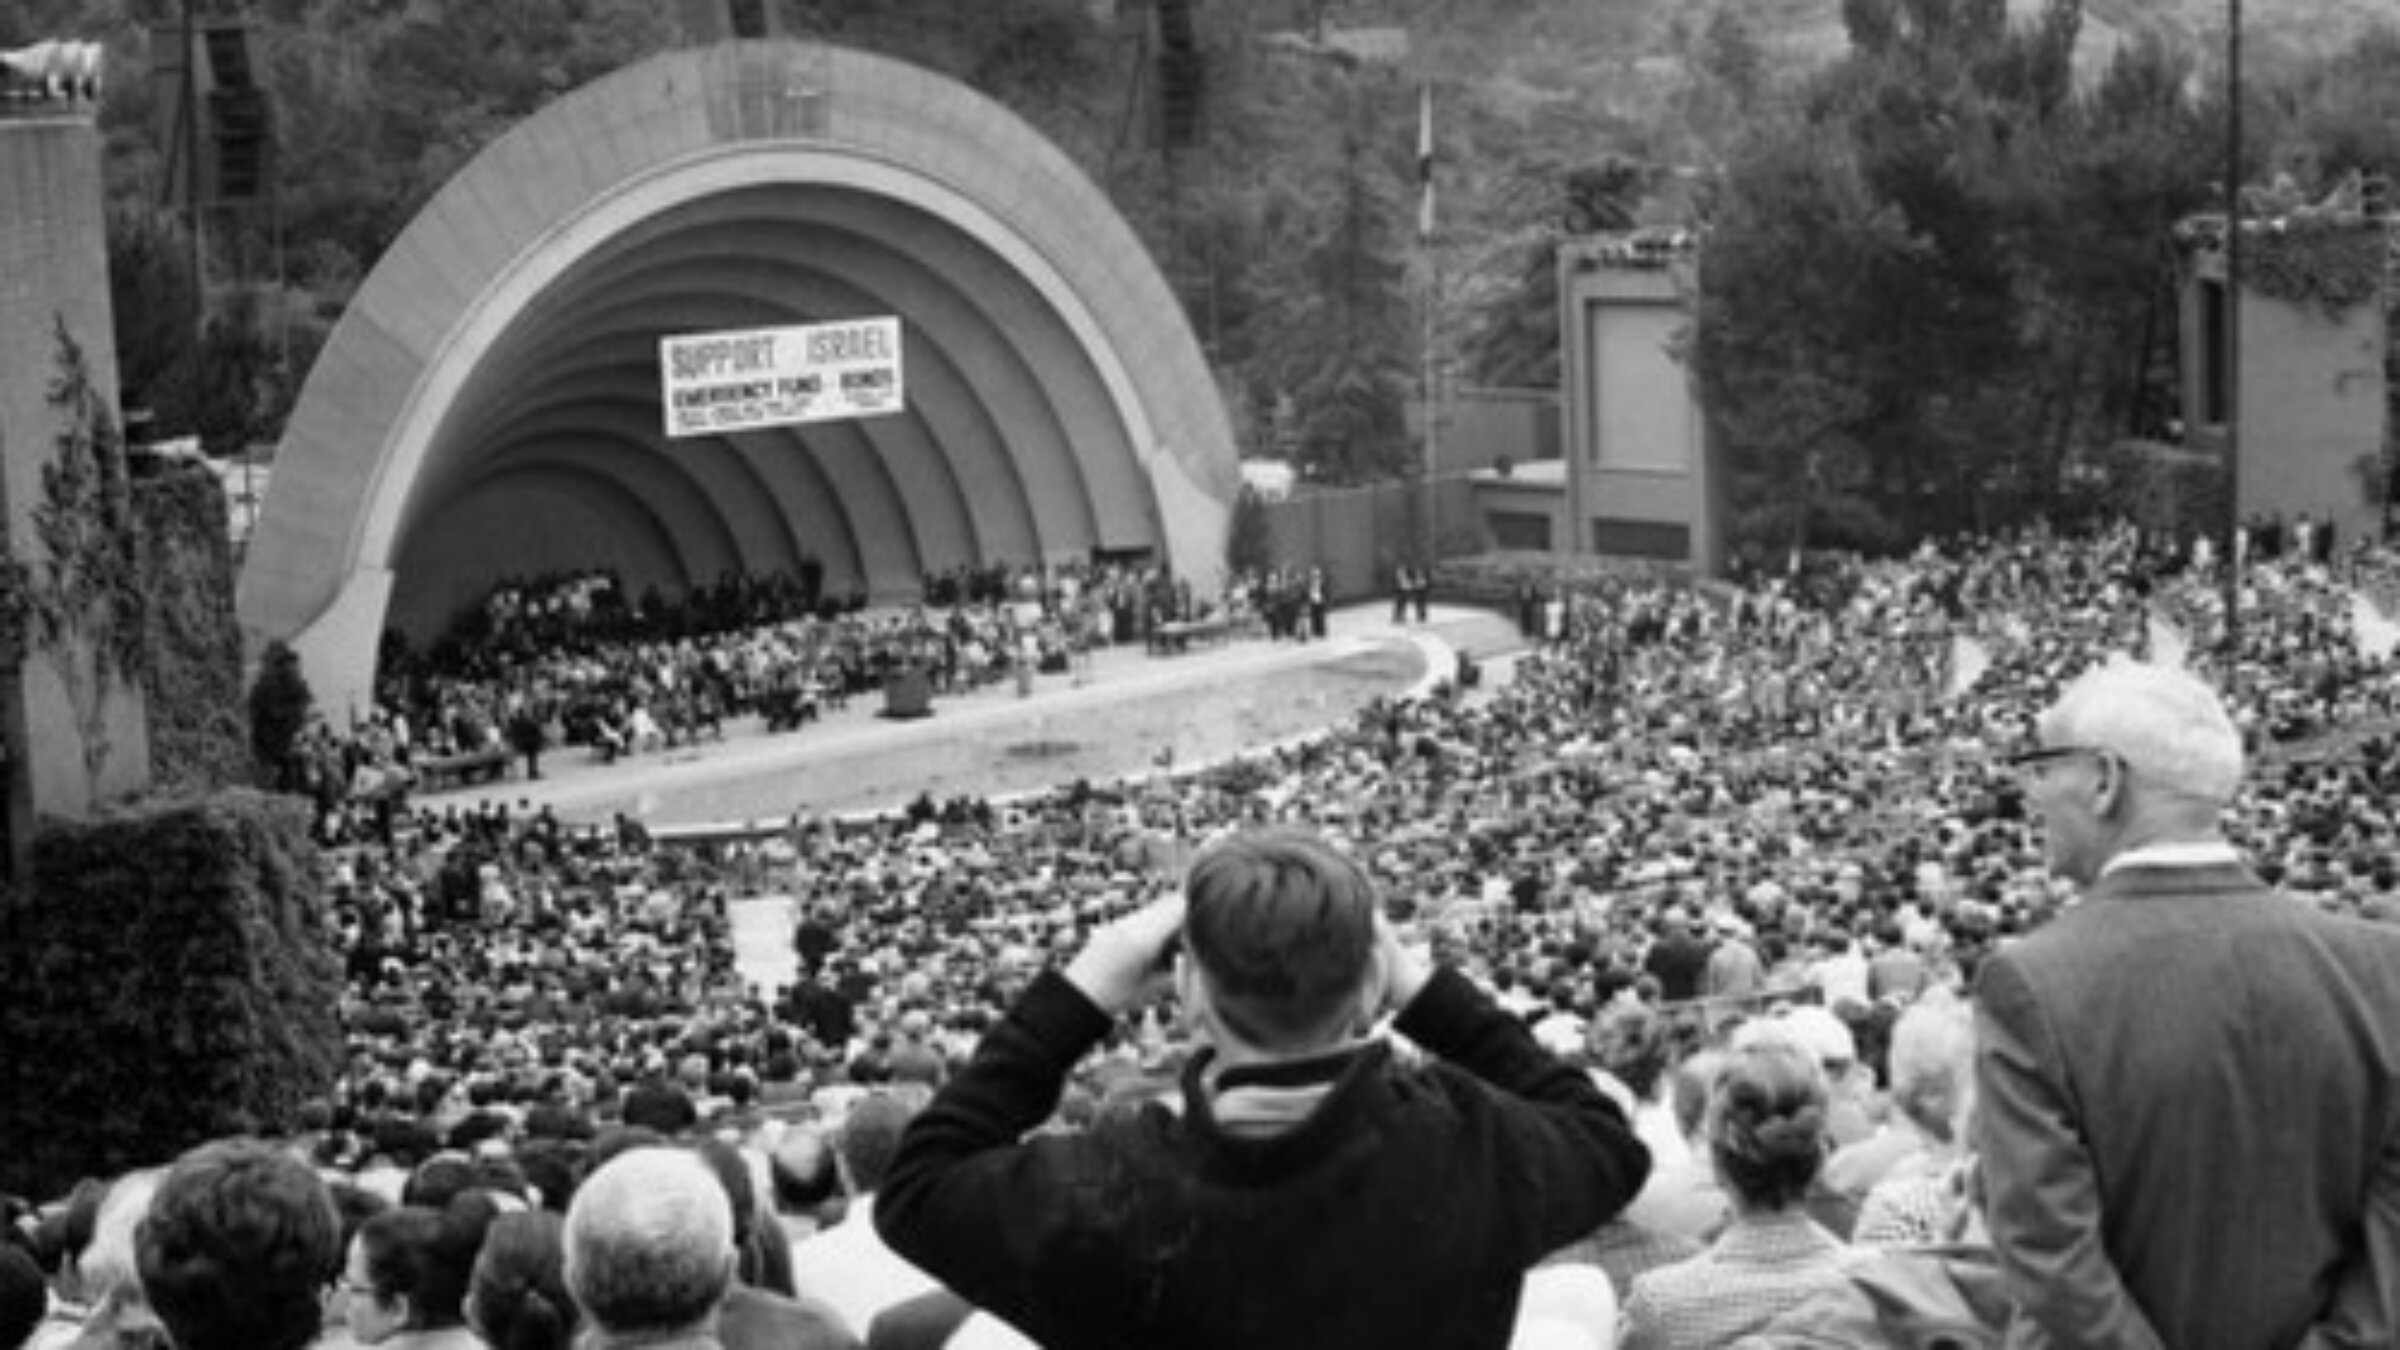 The Hollywood Bowl overflowed with people attending the 'Rally for the survival of Israel.' Gov. Ronald Reagan speaks from the podium. Celebrities present included Frank Sinatra, Danny Kaye and Ernest Borgnine.